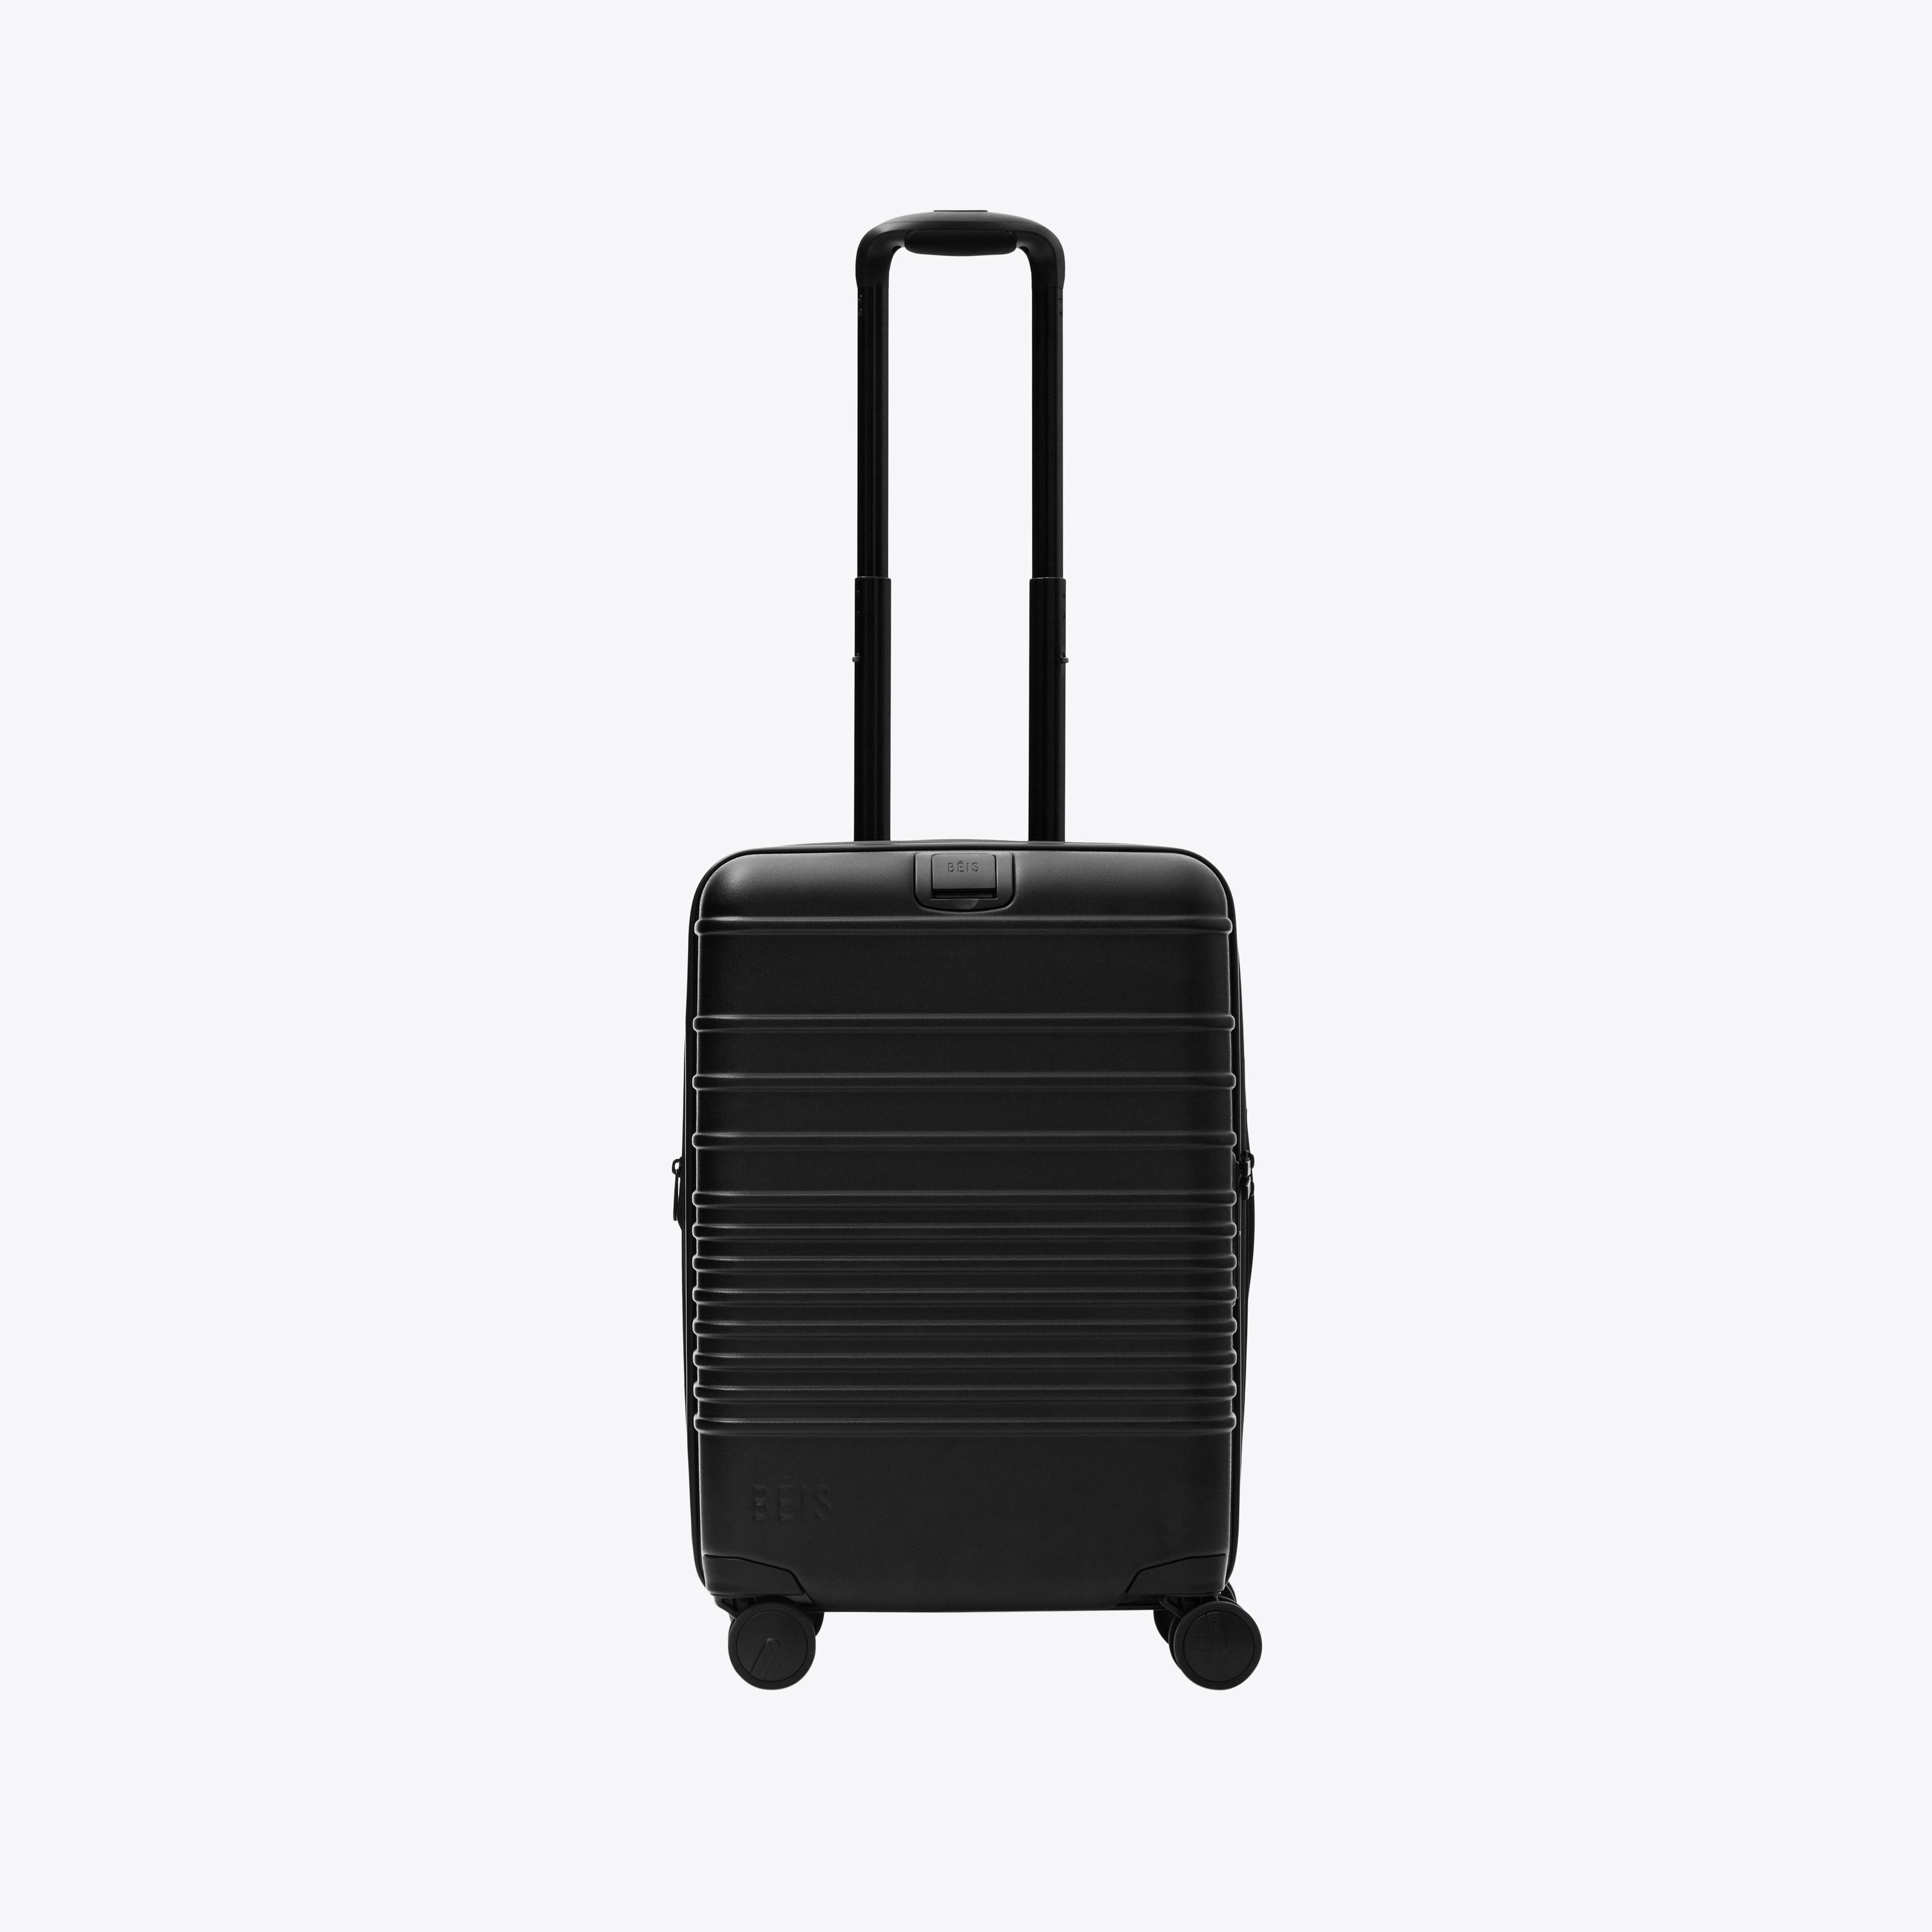 The Carry-On Roller in All Black